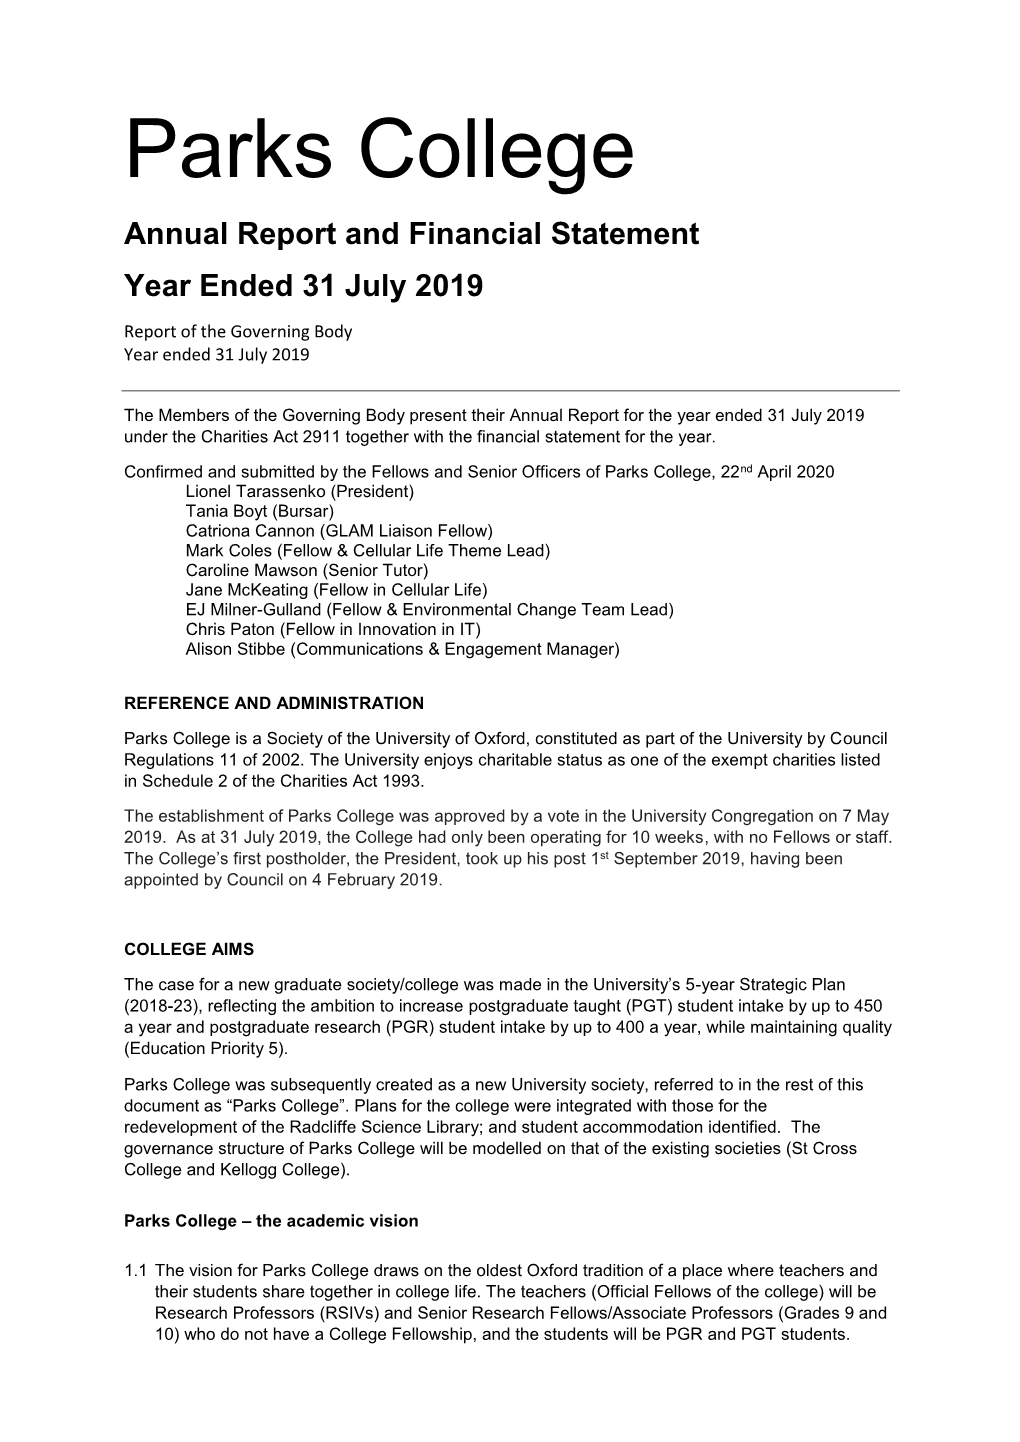 Parks College Annual Report and Financial Statement Year Ended 31 July 2019